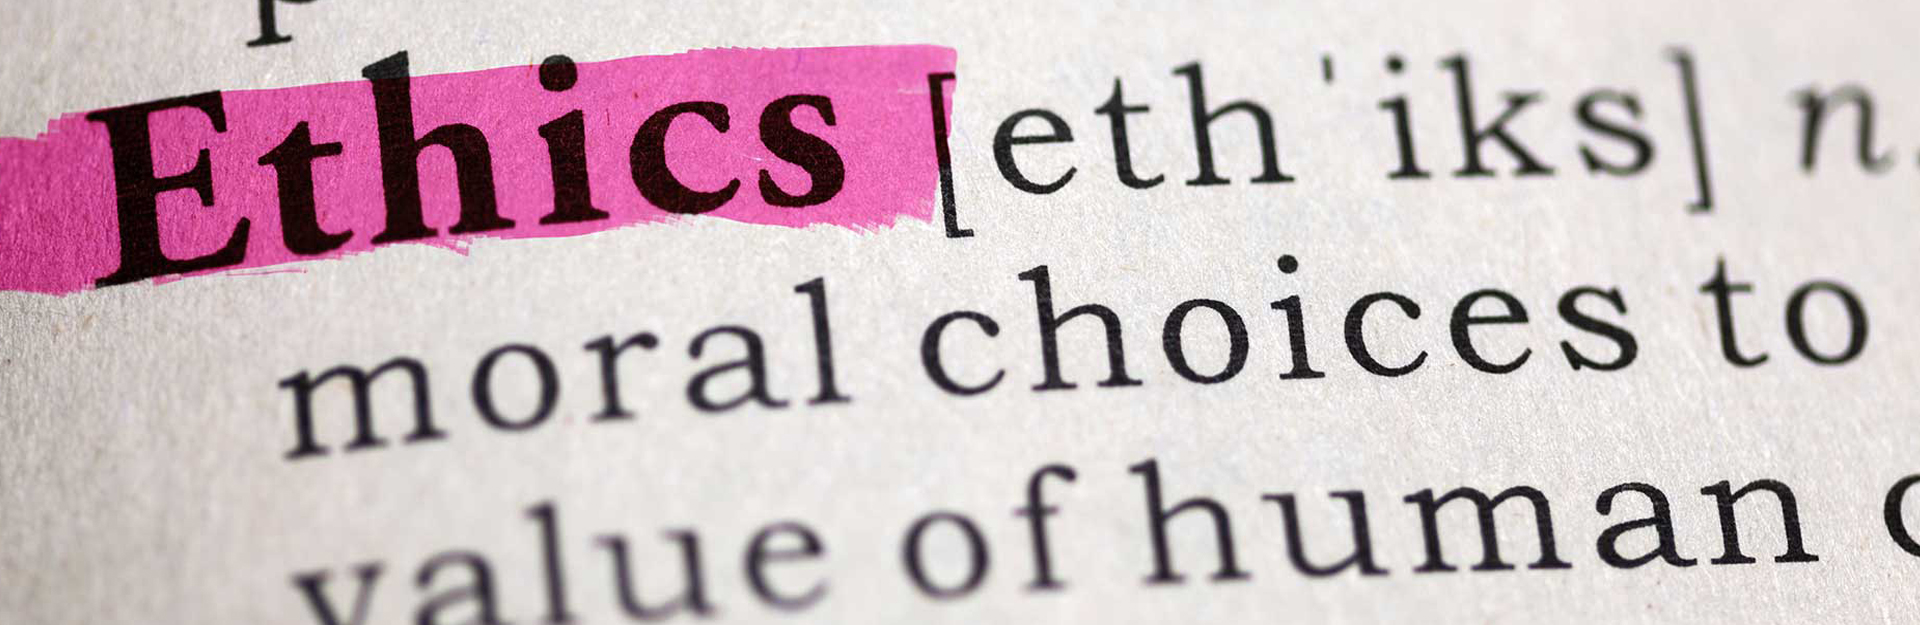 picture of a page from a dictionary with the word ethics highlighted and a portion of the definition, intended to be artistic not legible 